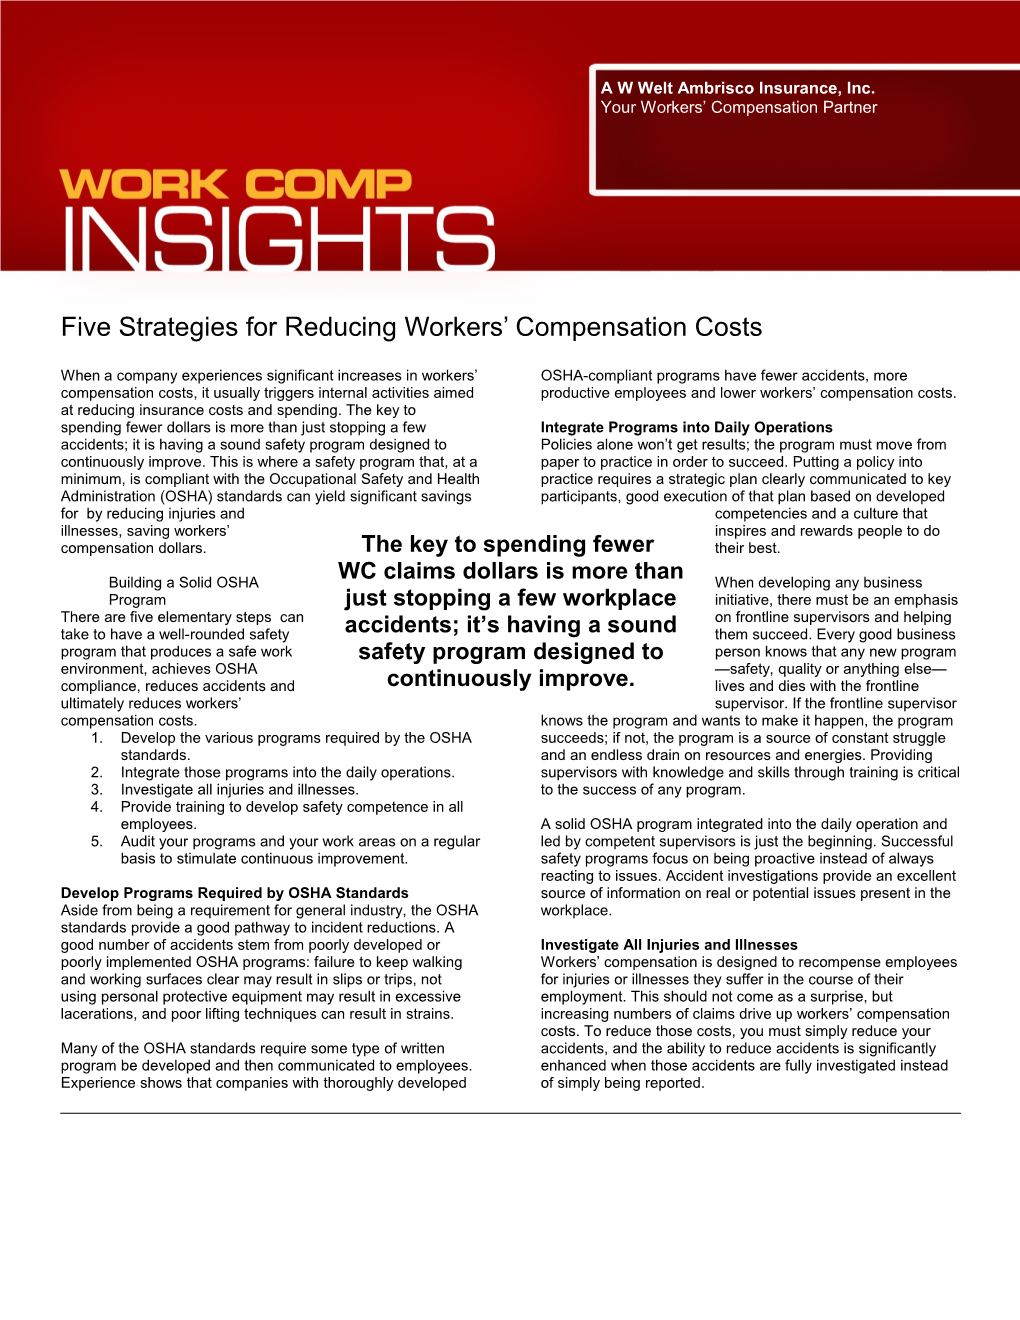 Five Strategies for Reducing Workers Compensation Costs